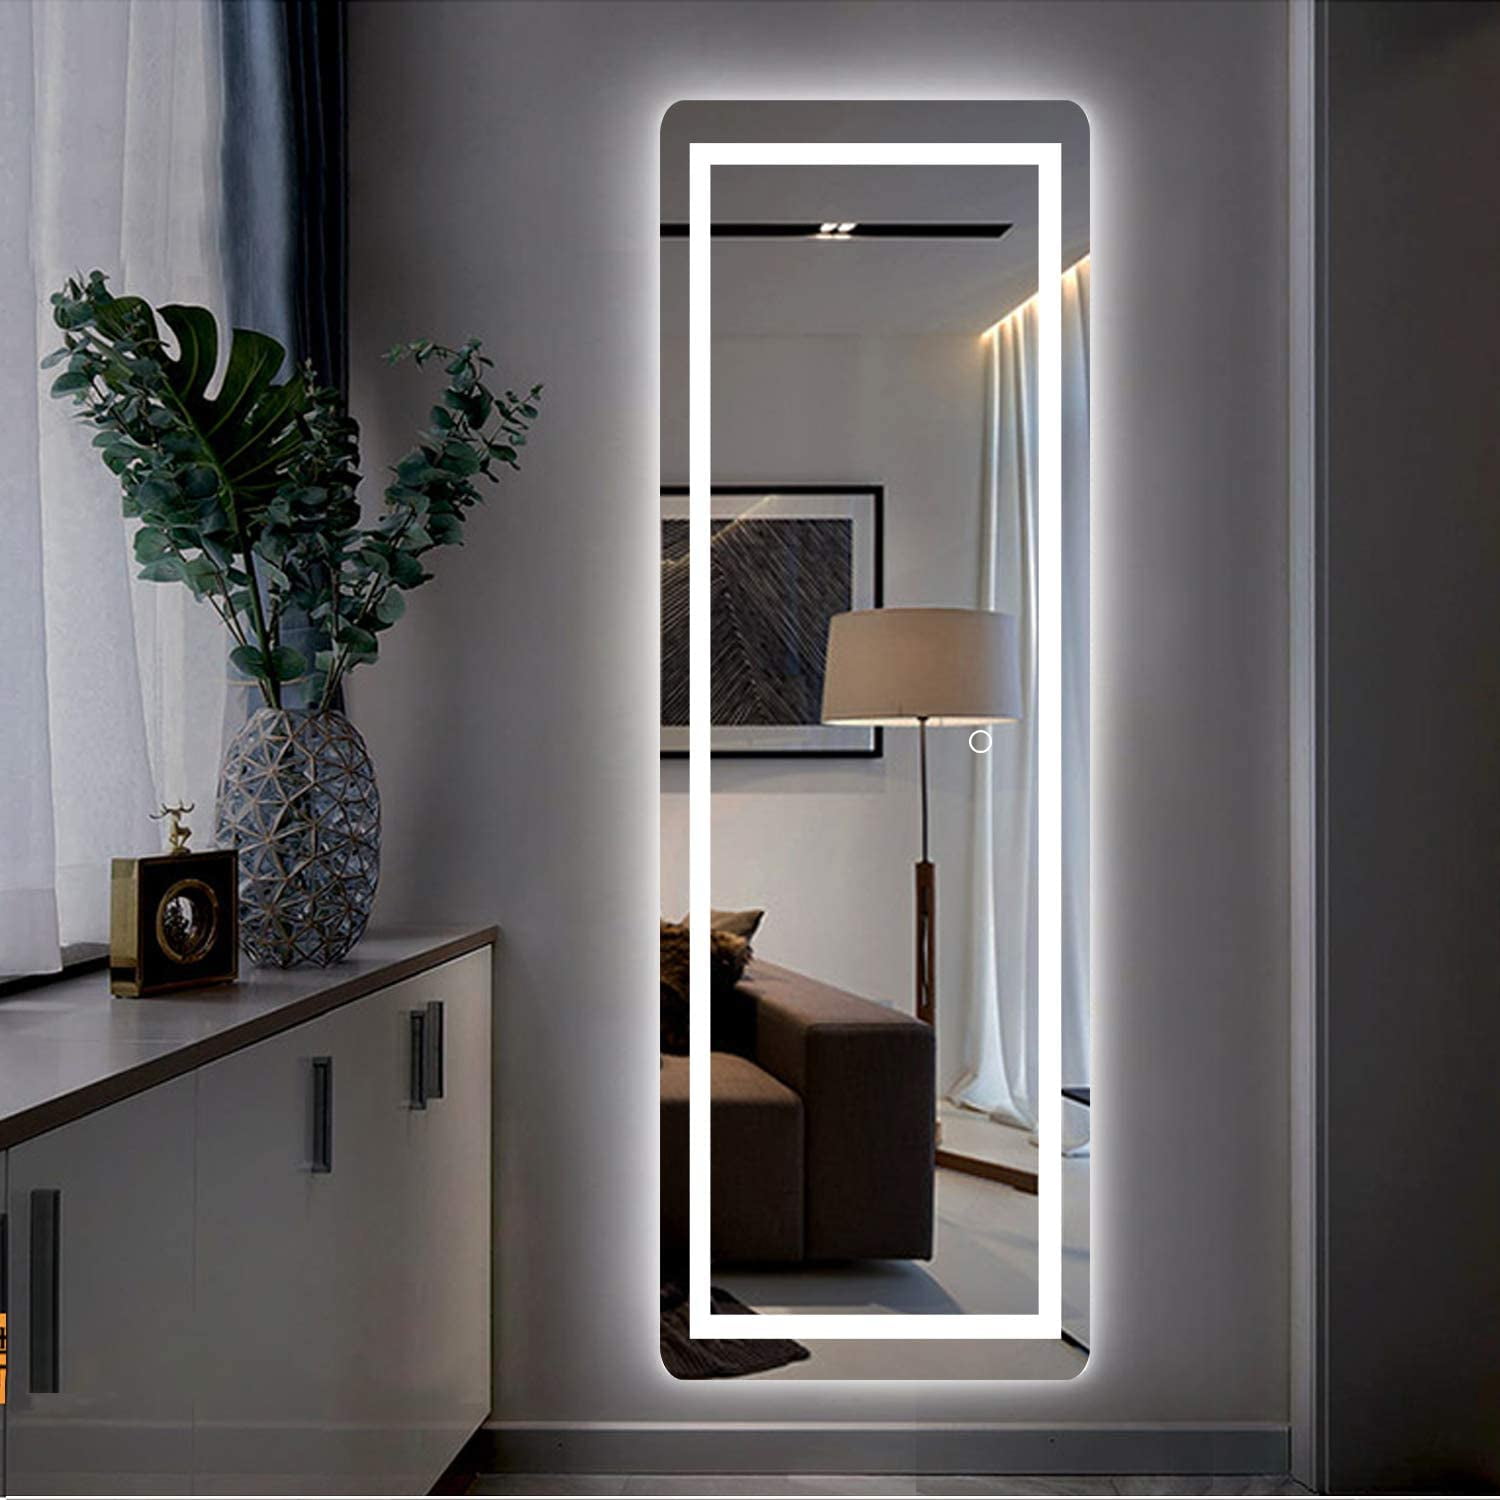 Details about  / Whole Body Mirror Wall Mounted LED Lighted Vanity Backlit Bedroom Bathroom Light